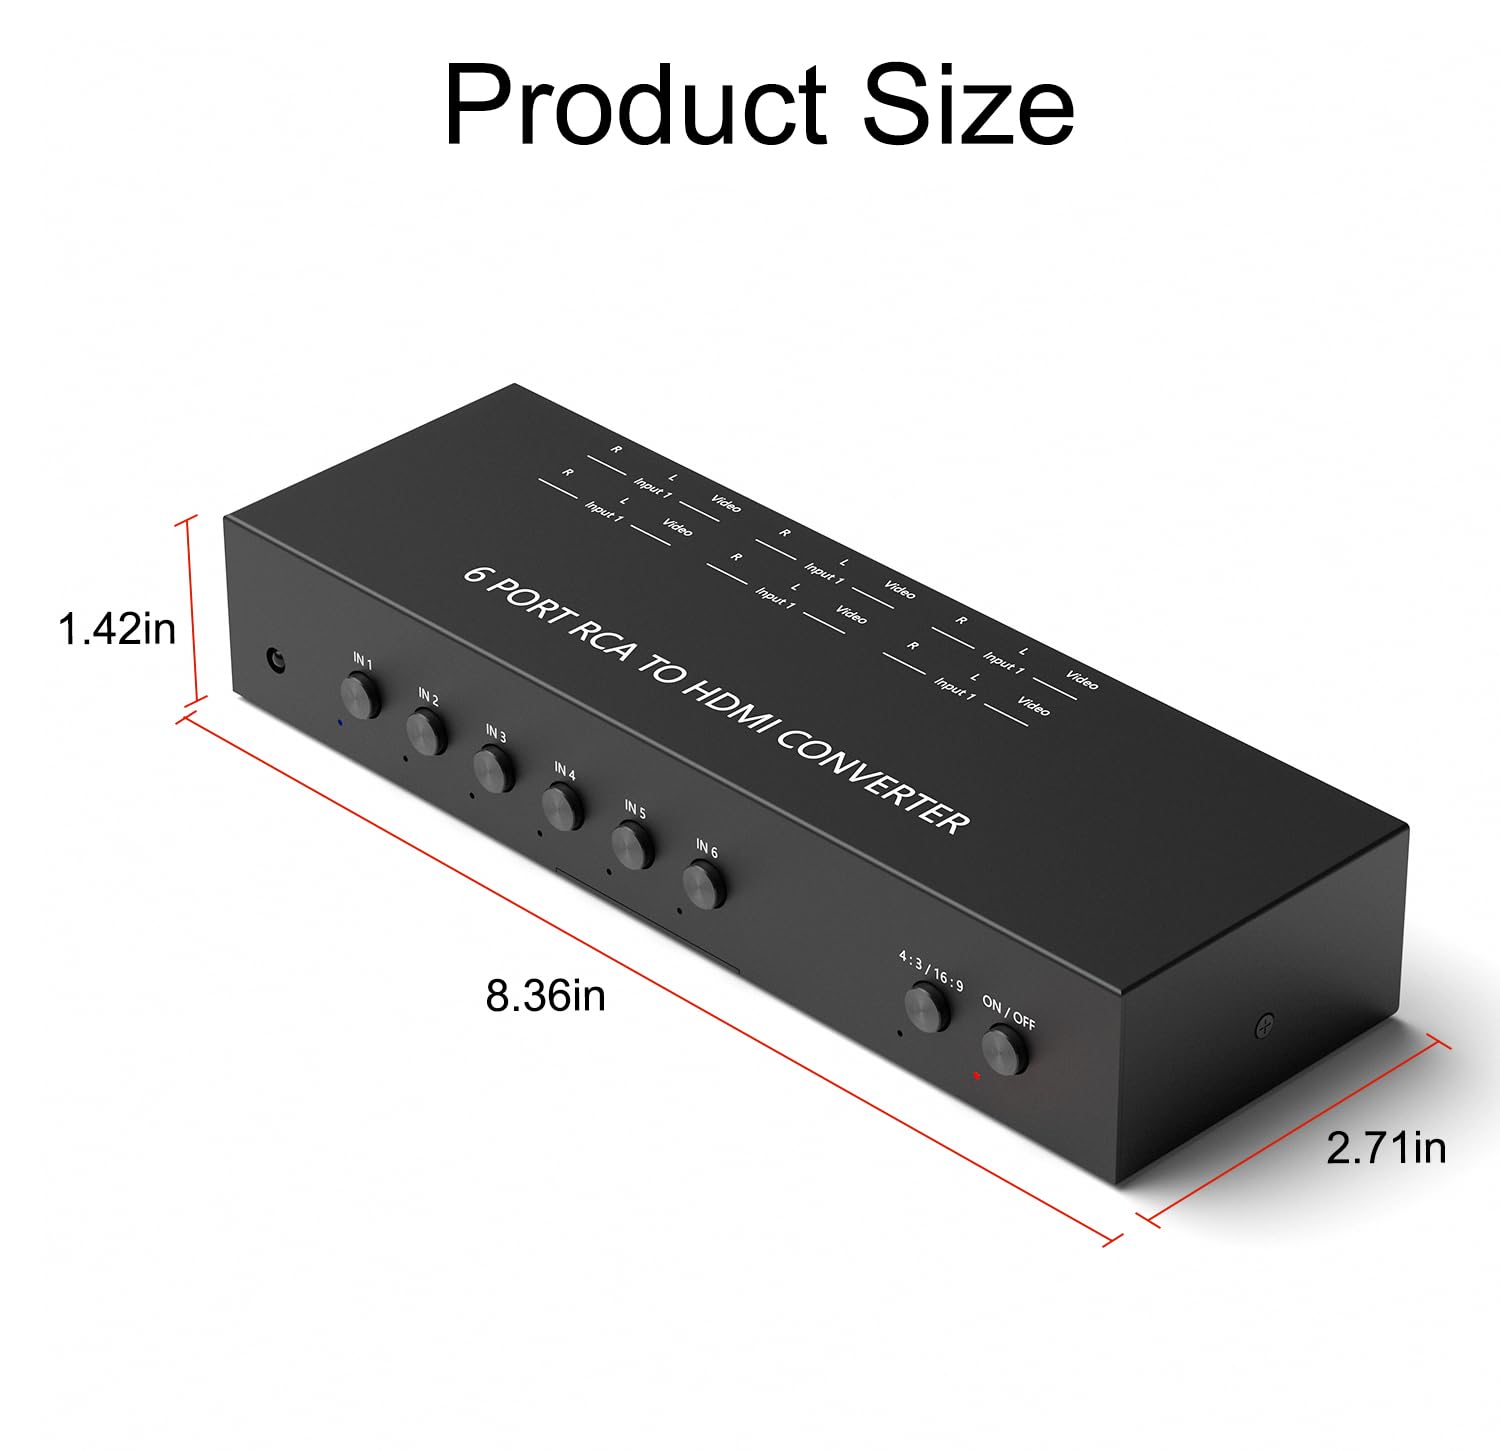 ZUZONG 6 Way RCA to HDMI Converter 1080P/720P RCA Composite CVBS AV Switch to HDMI Converter Adapter Support 4:3/16:9 Switch for Sega Xbox PS1 PS2 PS3 N64 NGC SNES WII VHS VCR Camera DVD